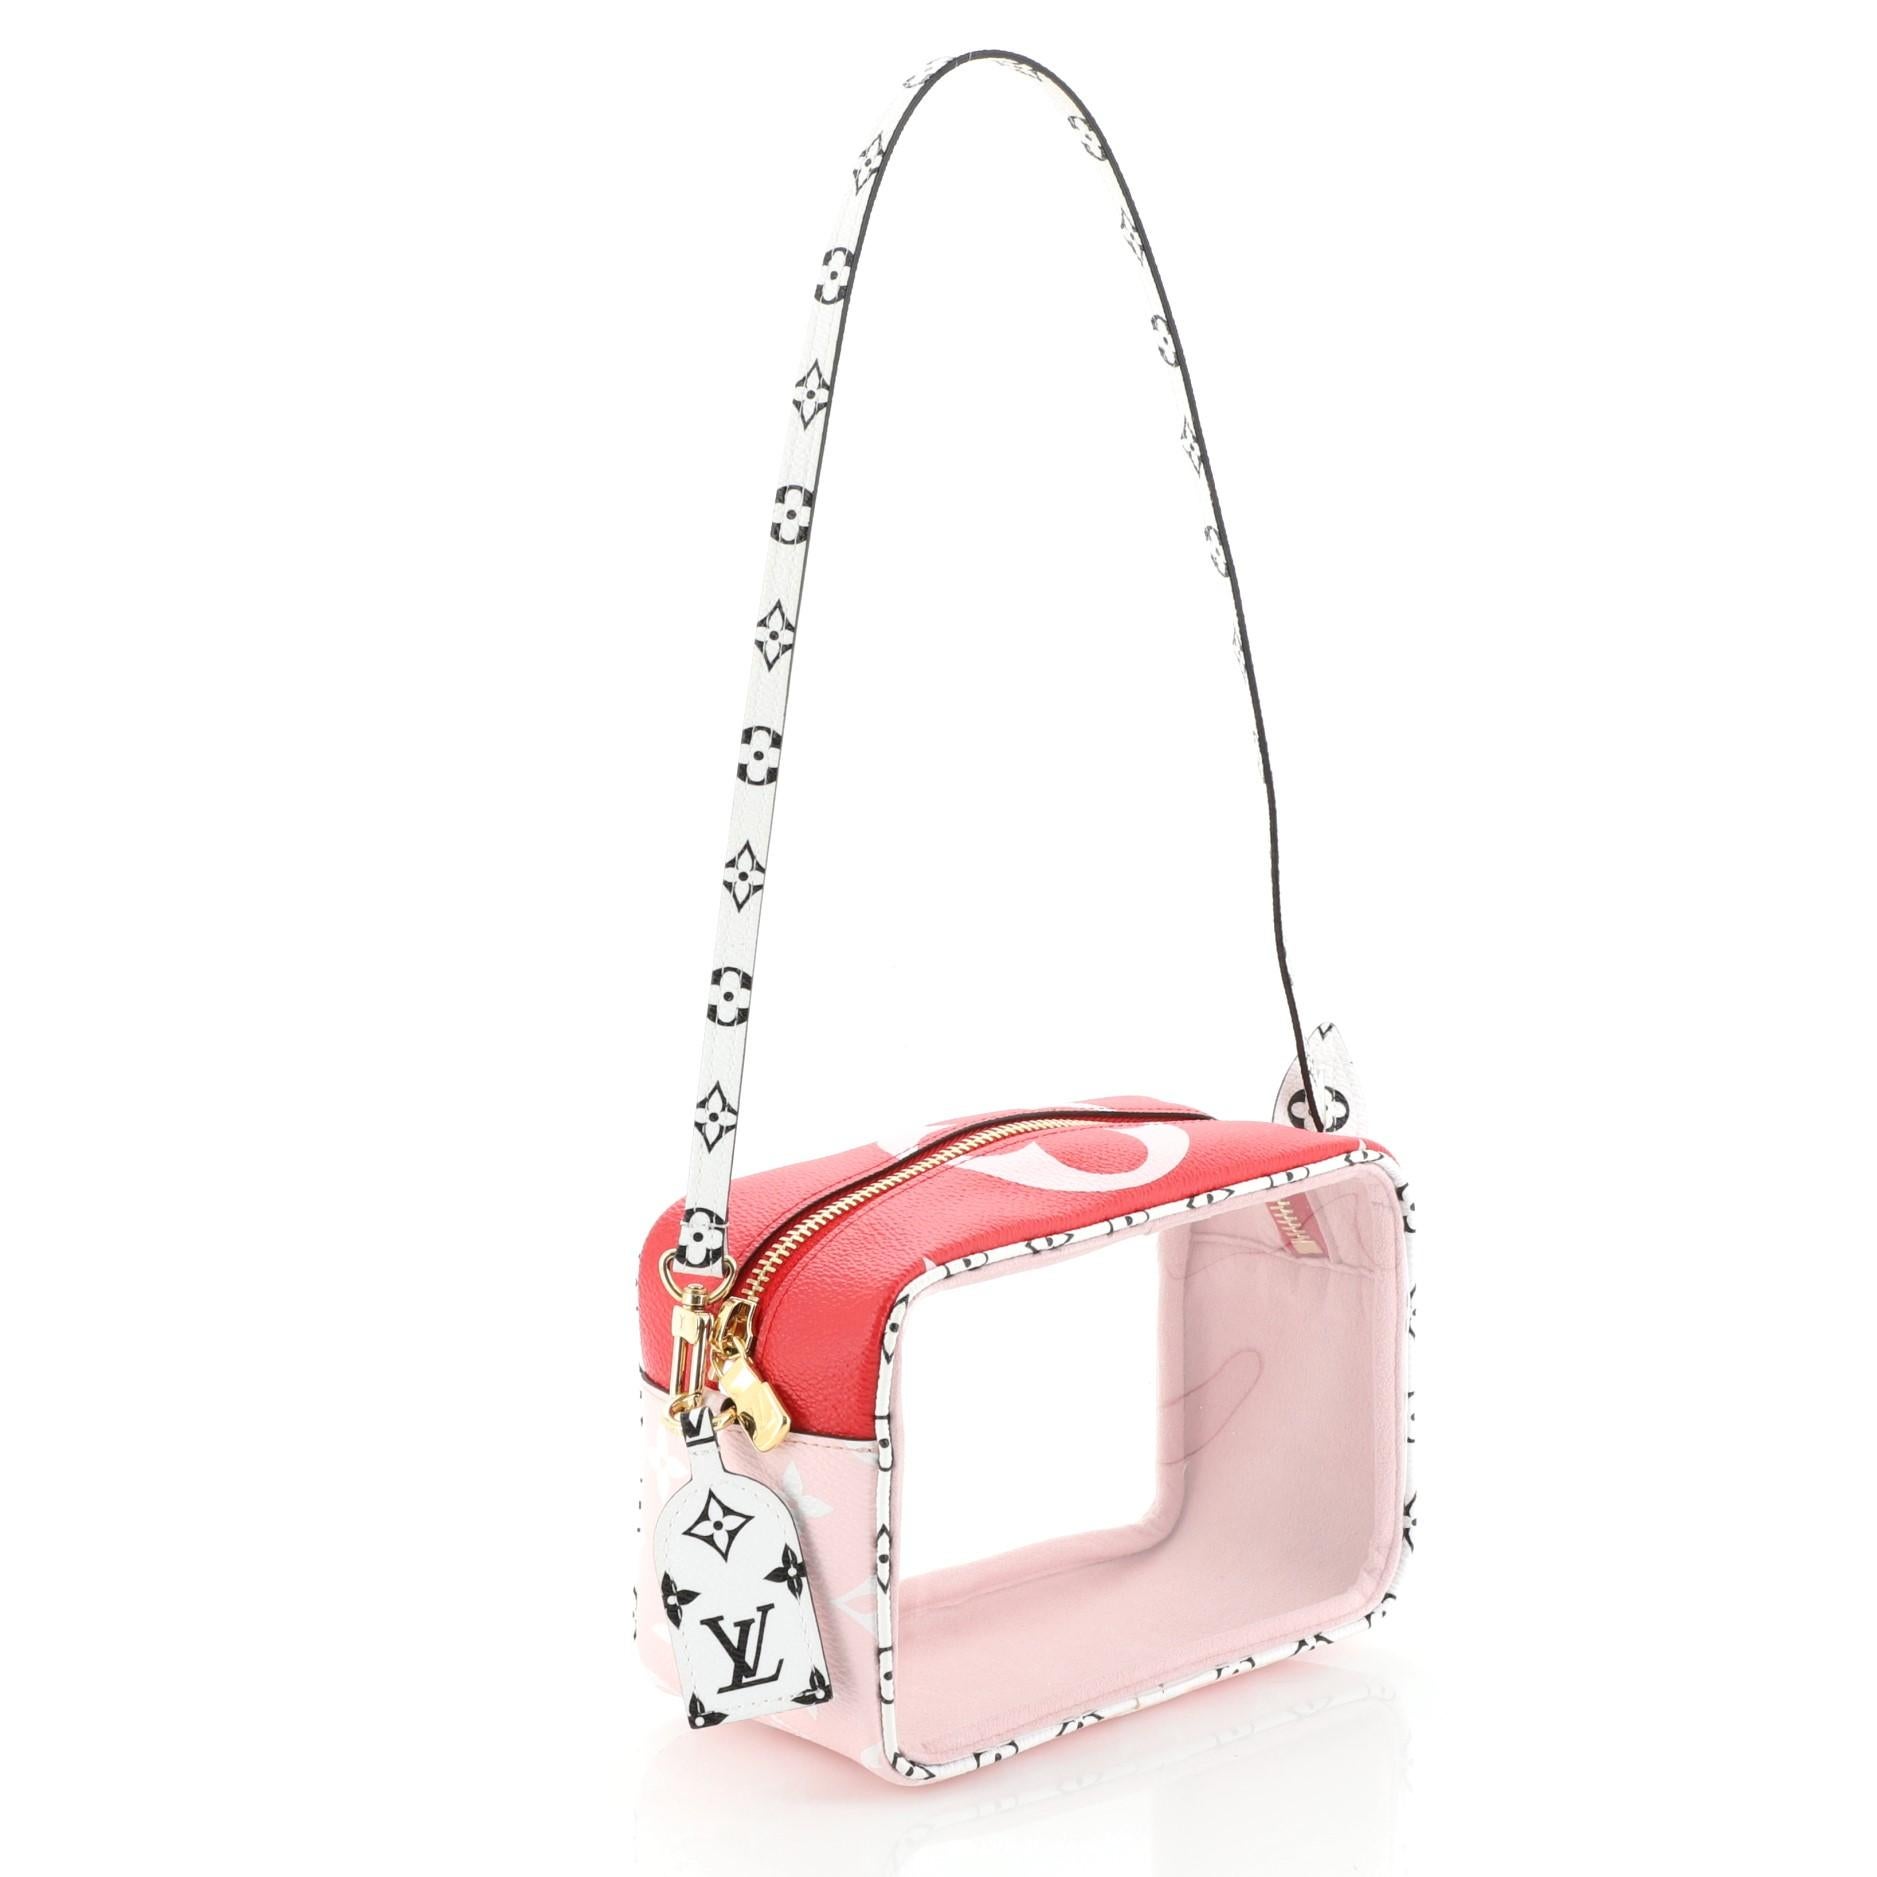 This Louis Vuitton Beach Pouch Limited Edition Colored Monogram Giant, crafted from pink and multicolor monogram coated canvas and PVC, features a flat top handle and gold-tone hardware. Its zip closure opens to a pink microfiber and PVC interior.